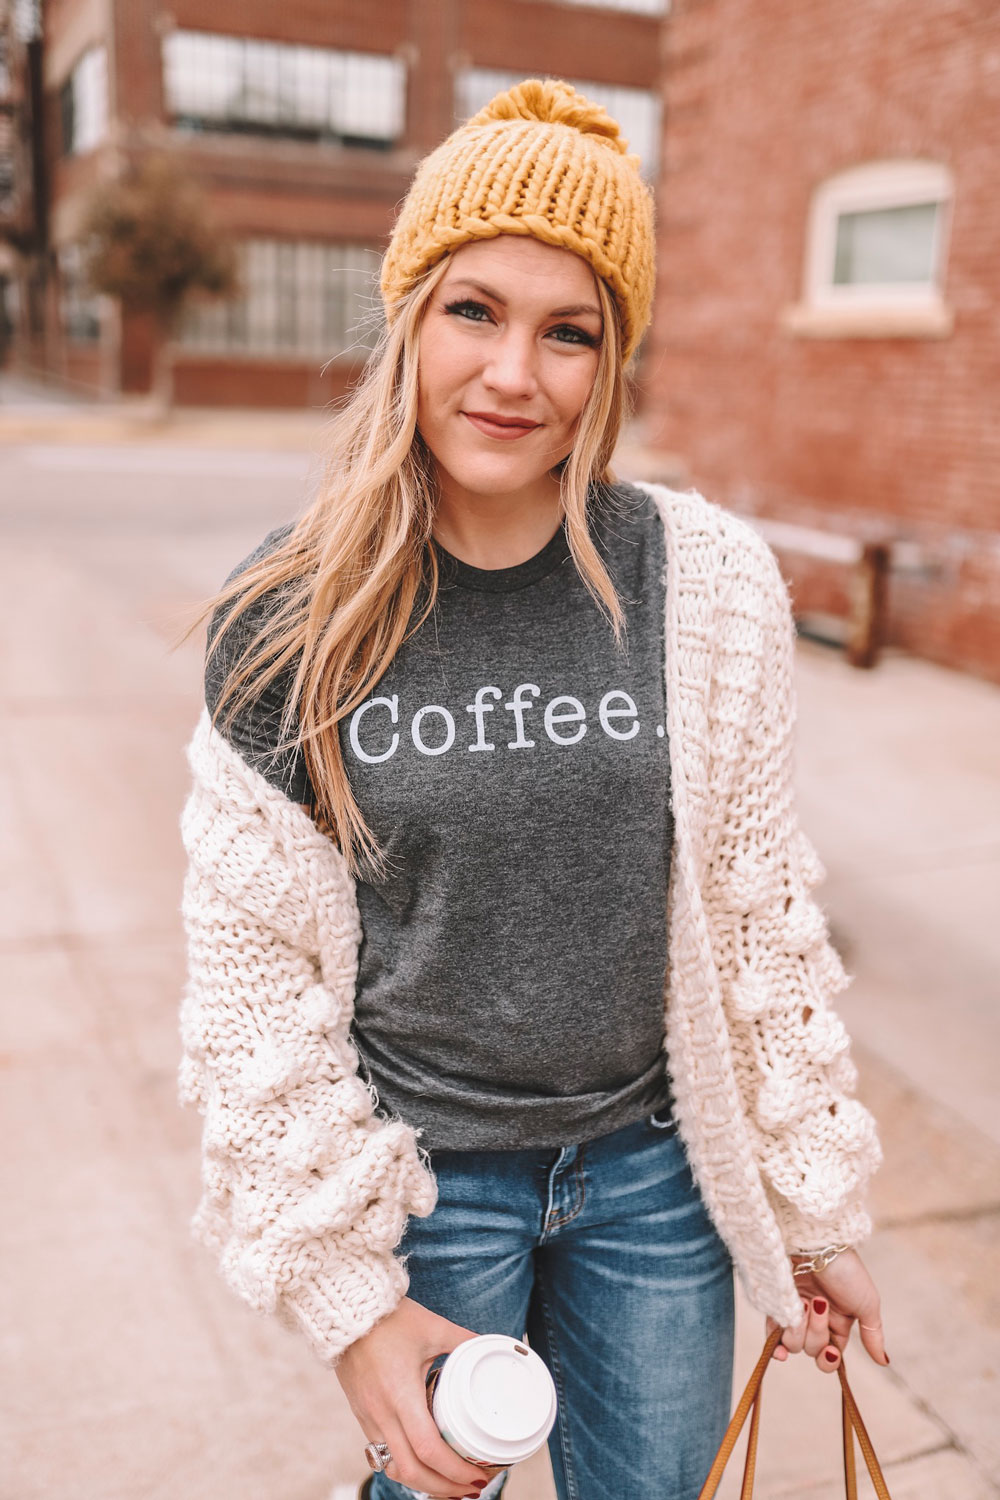 Amanda Martin, Oklahoma City blogger, wears a coffee graphic tee while sipping from a Starbucks holiday cup 